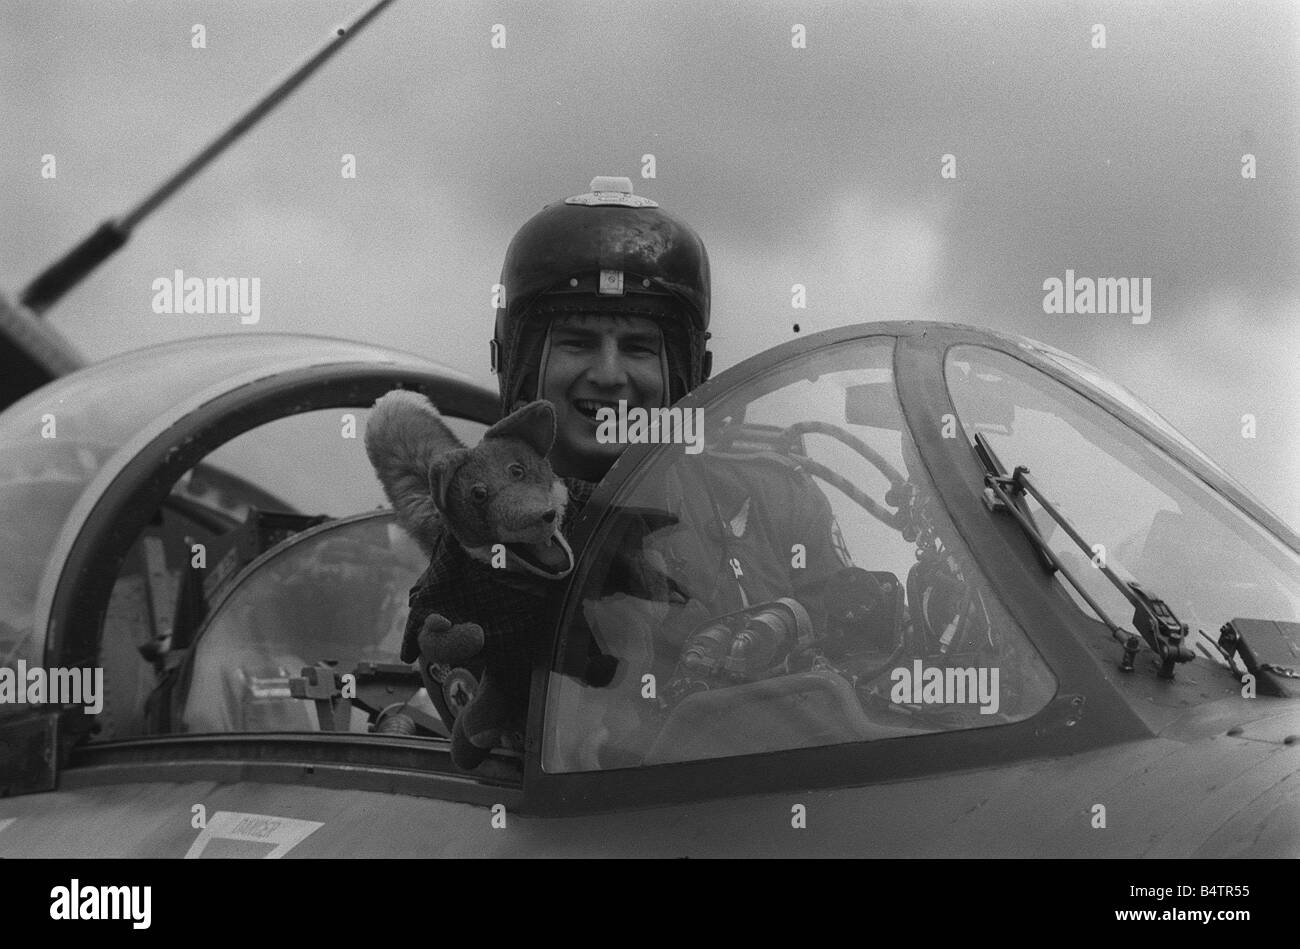 TV s Basil Bush visits RAF S HHonington 11 3 99 76 5875 Box 61 More Boom Boom than sonic boom TV s funniest fox Basil Brush takes a trip in a British fighter whilst on a visit to RAF Honington Y2K Funny DTGU2 Stock Photo